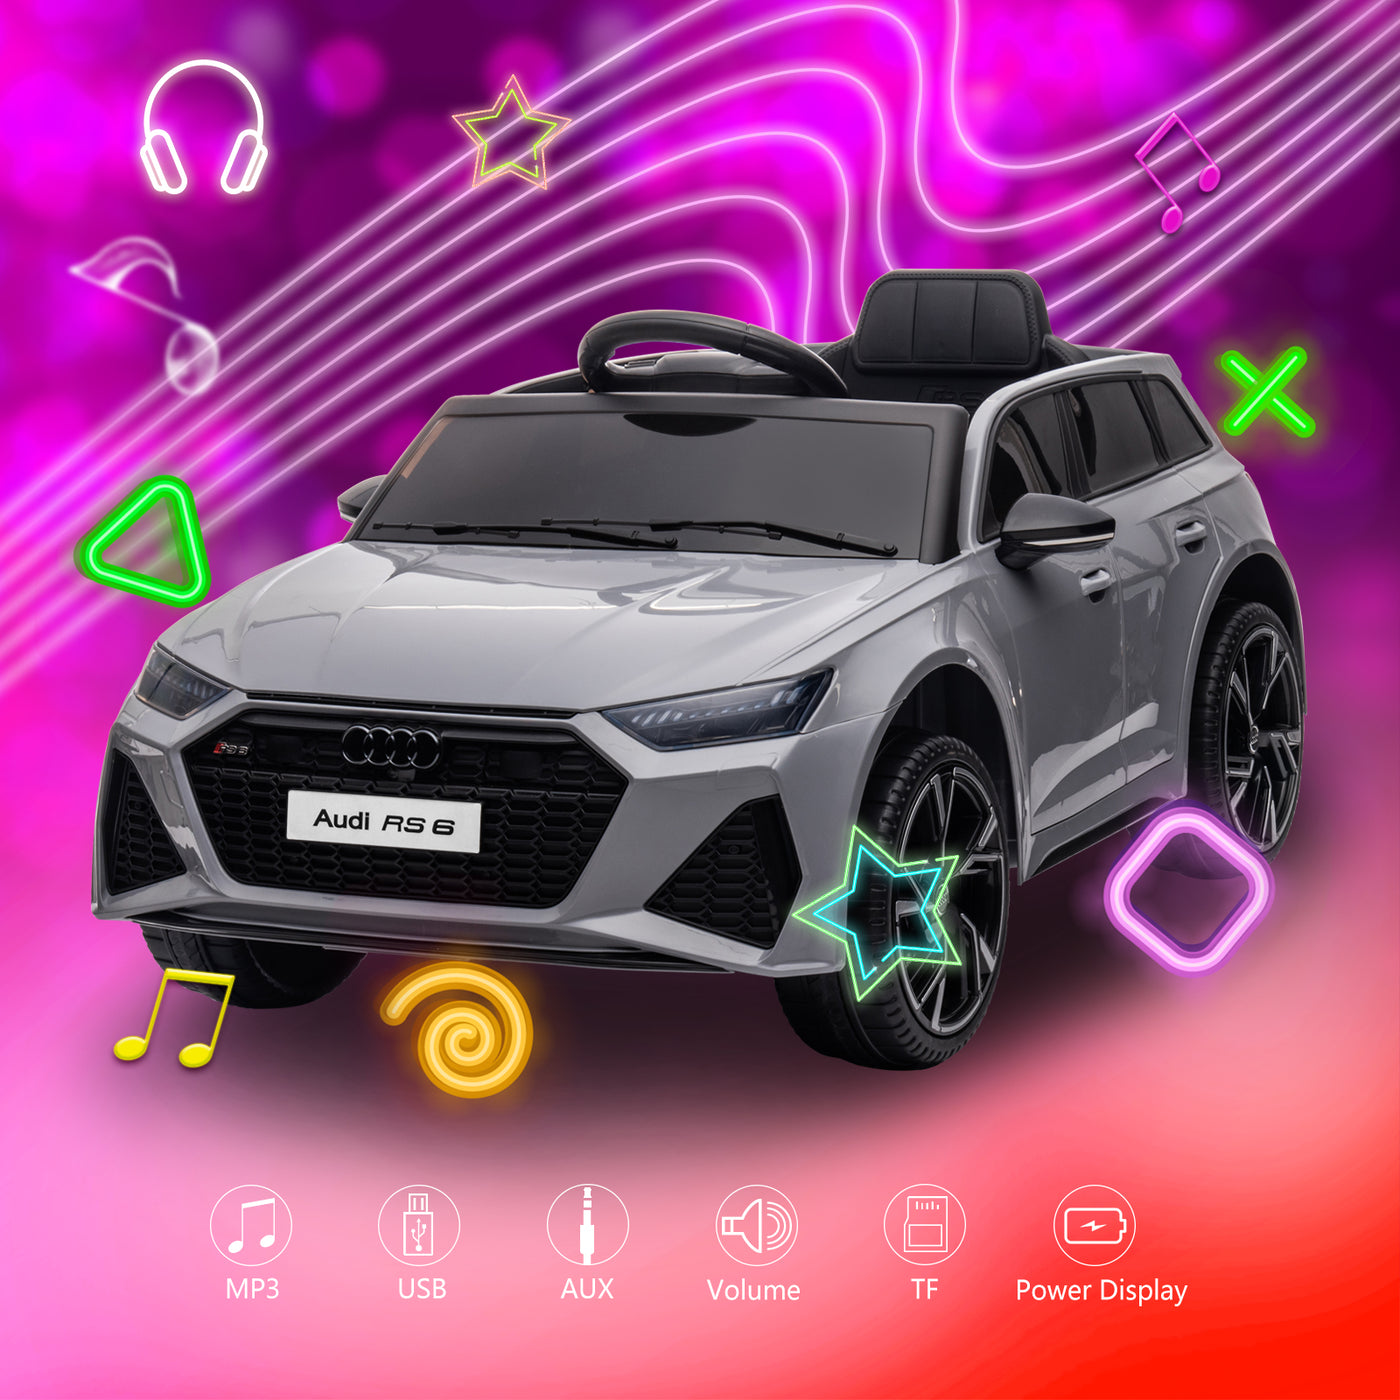 Licensed Audi RS 6 Ride On Car for Kids 12V Electric Car with 2.4G Remote Control, Seat Belt, Openable Door, Spring Suspension, LED Light